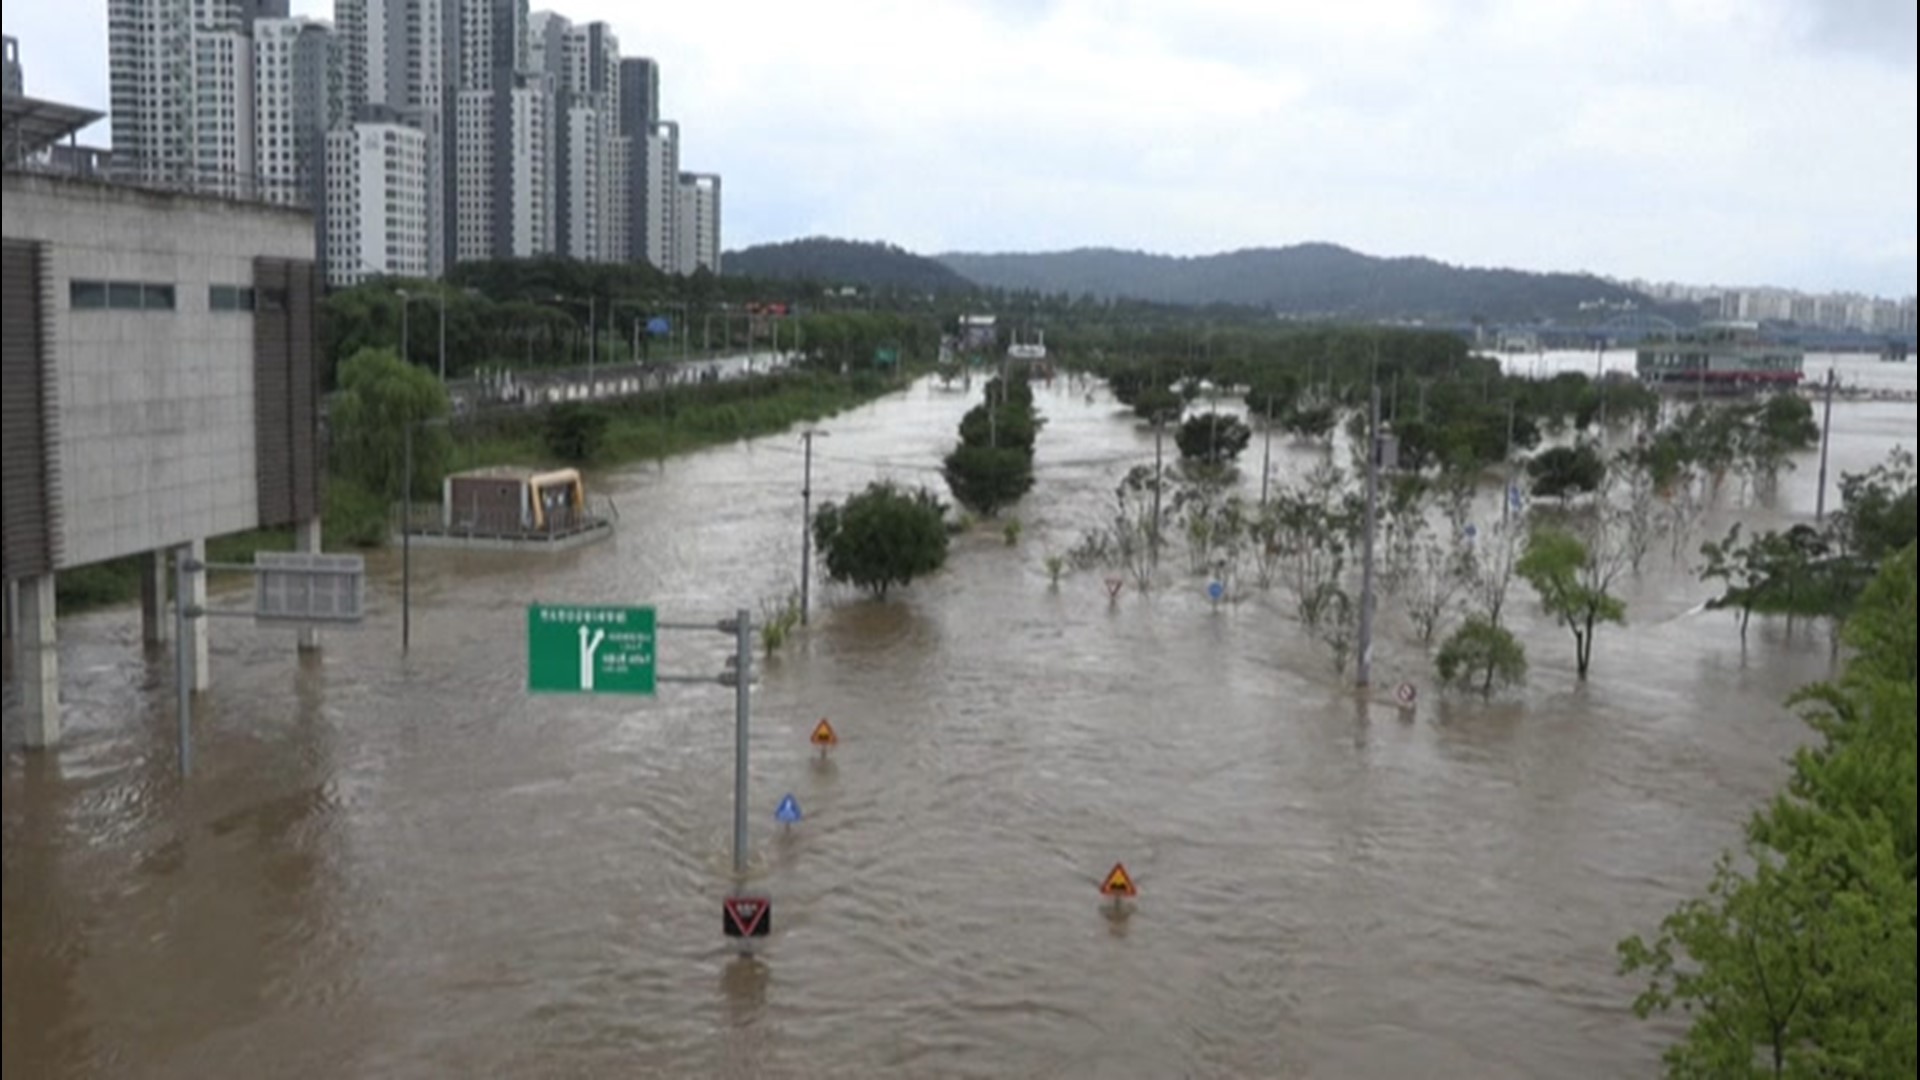 Roads in Seoul, South Korea, were closed on Aug. 3, as heavy rain caused the Han River to overflow its banks.